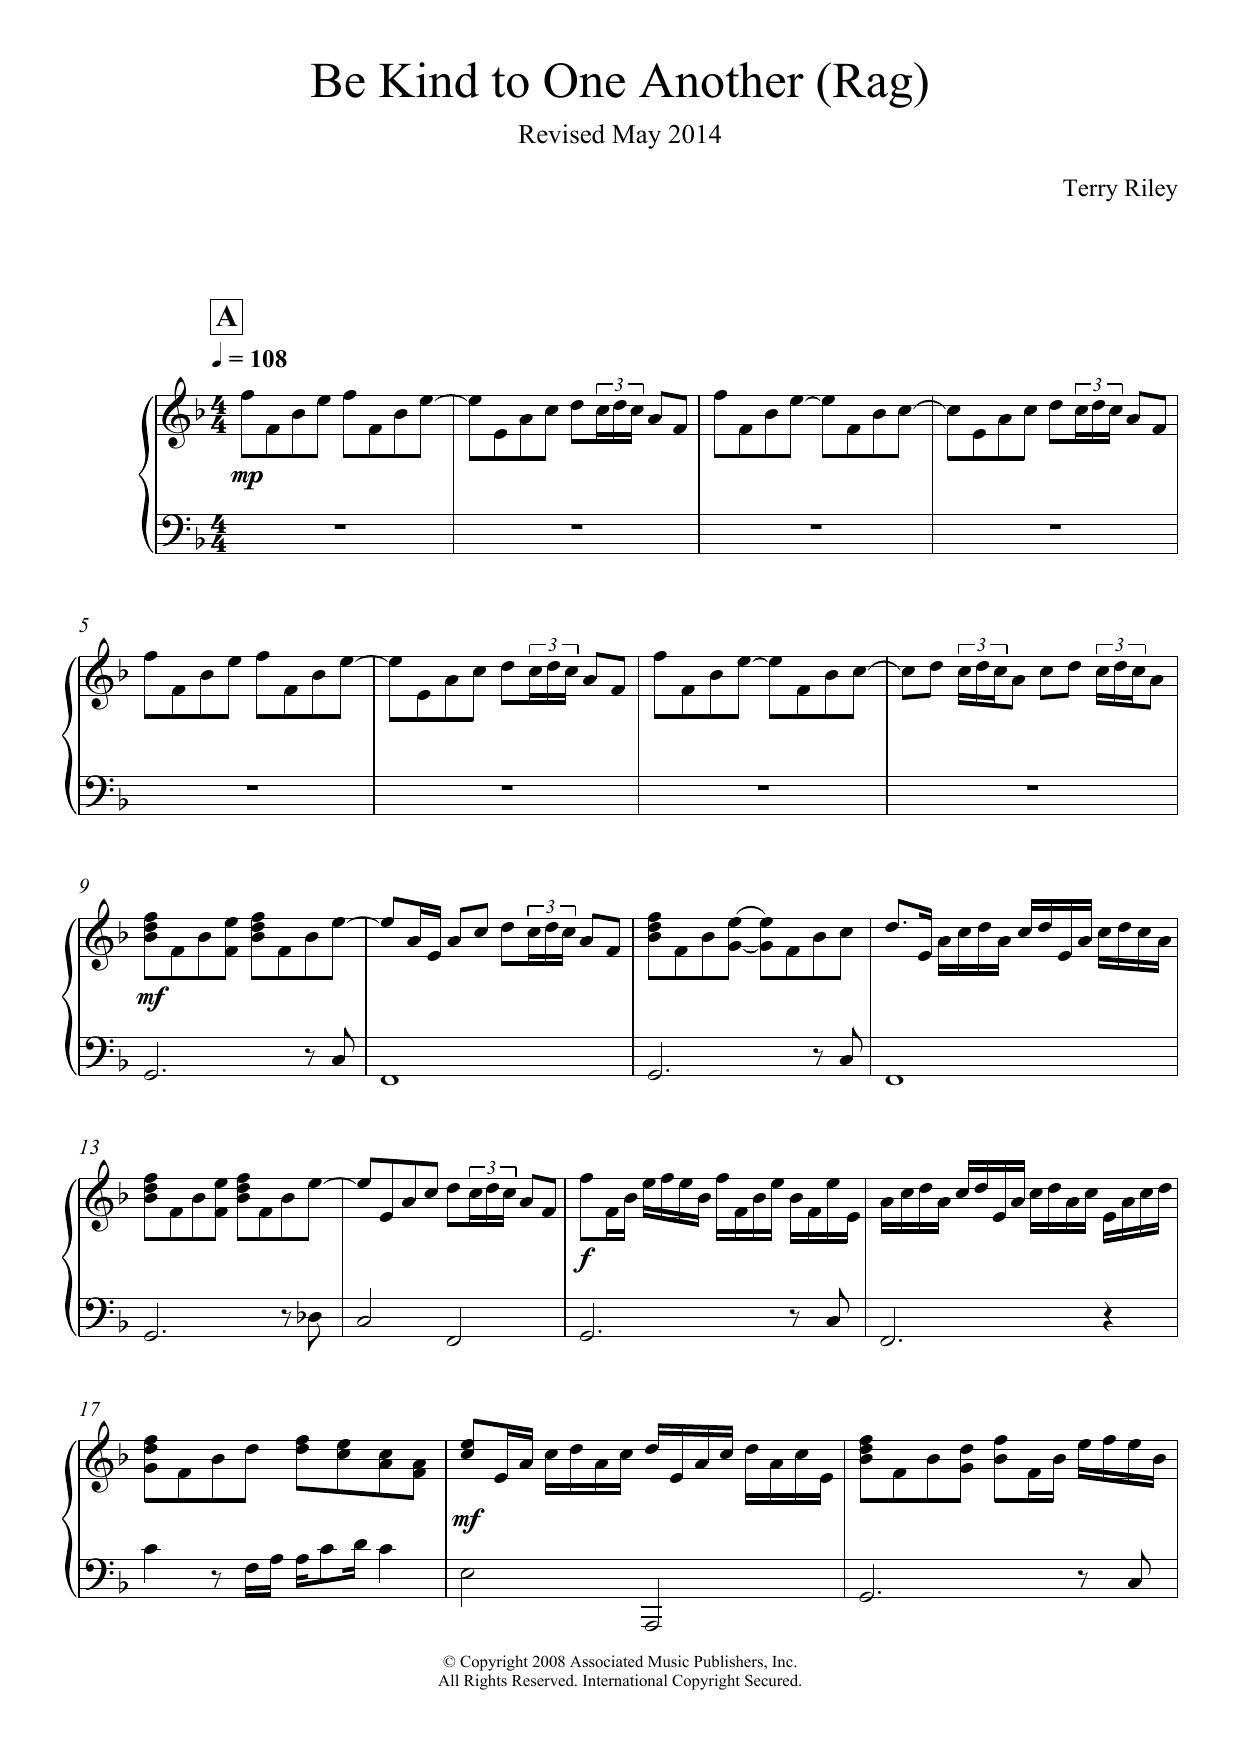 Download Terry Riley Be Kind To One Another (Rag) Sheet Music